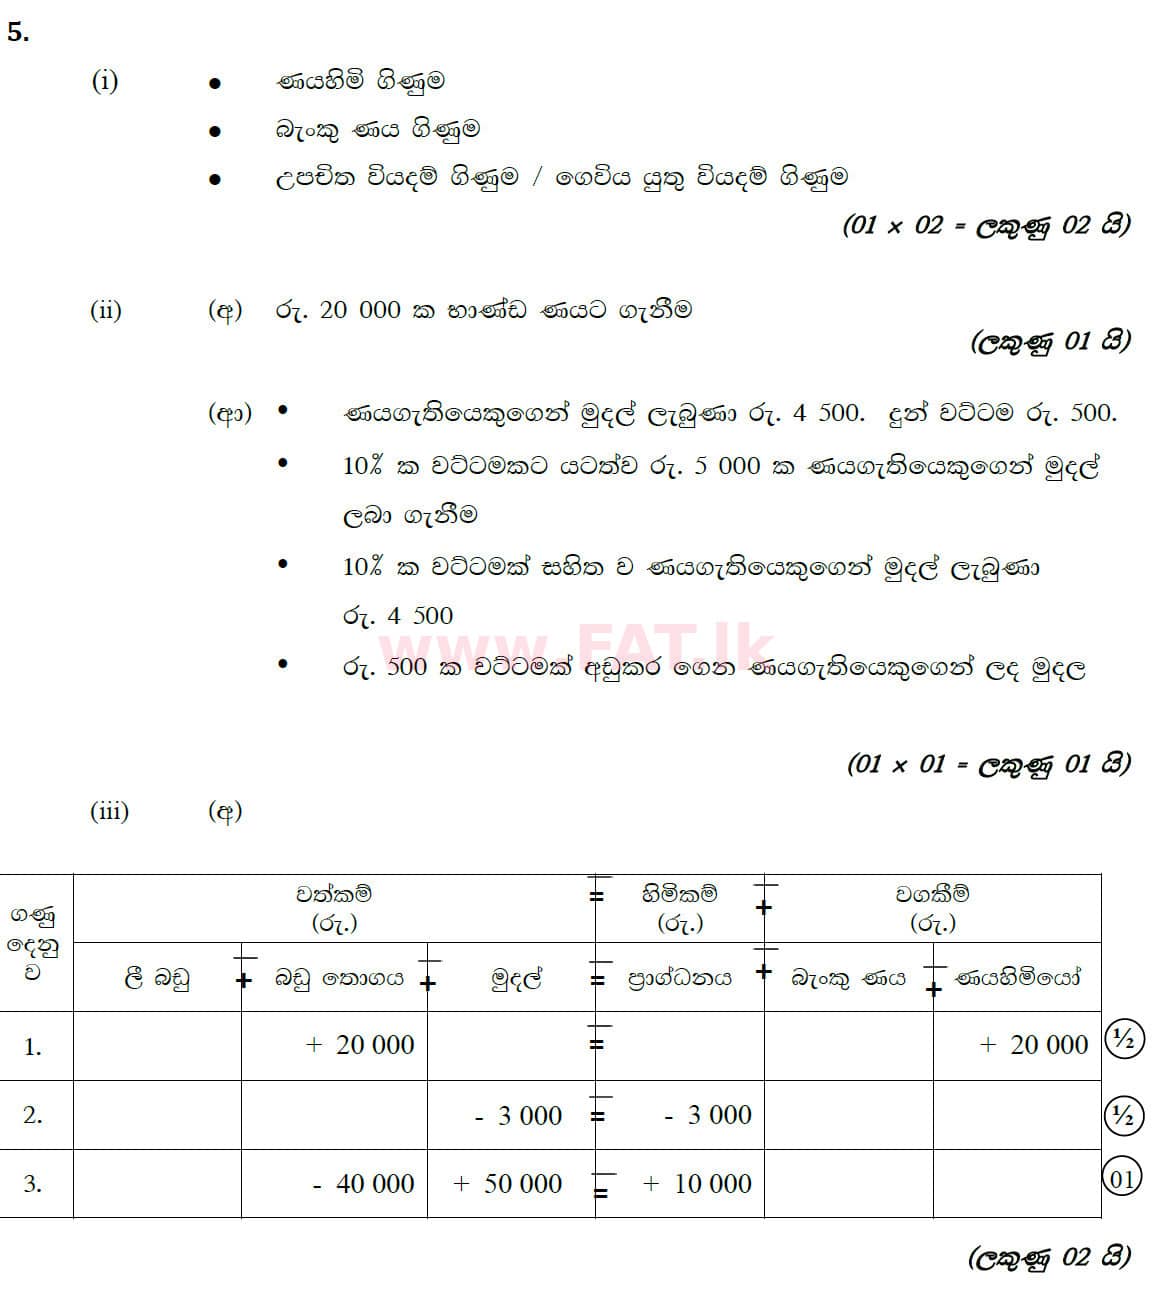 National Syllabus : Ordinary Level (O/L) Business and Accounting Studies - 2020 March - Paper II (සිංහල Medium) 5 5766